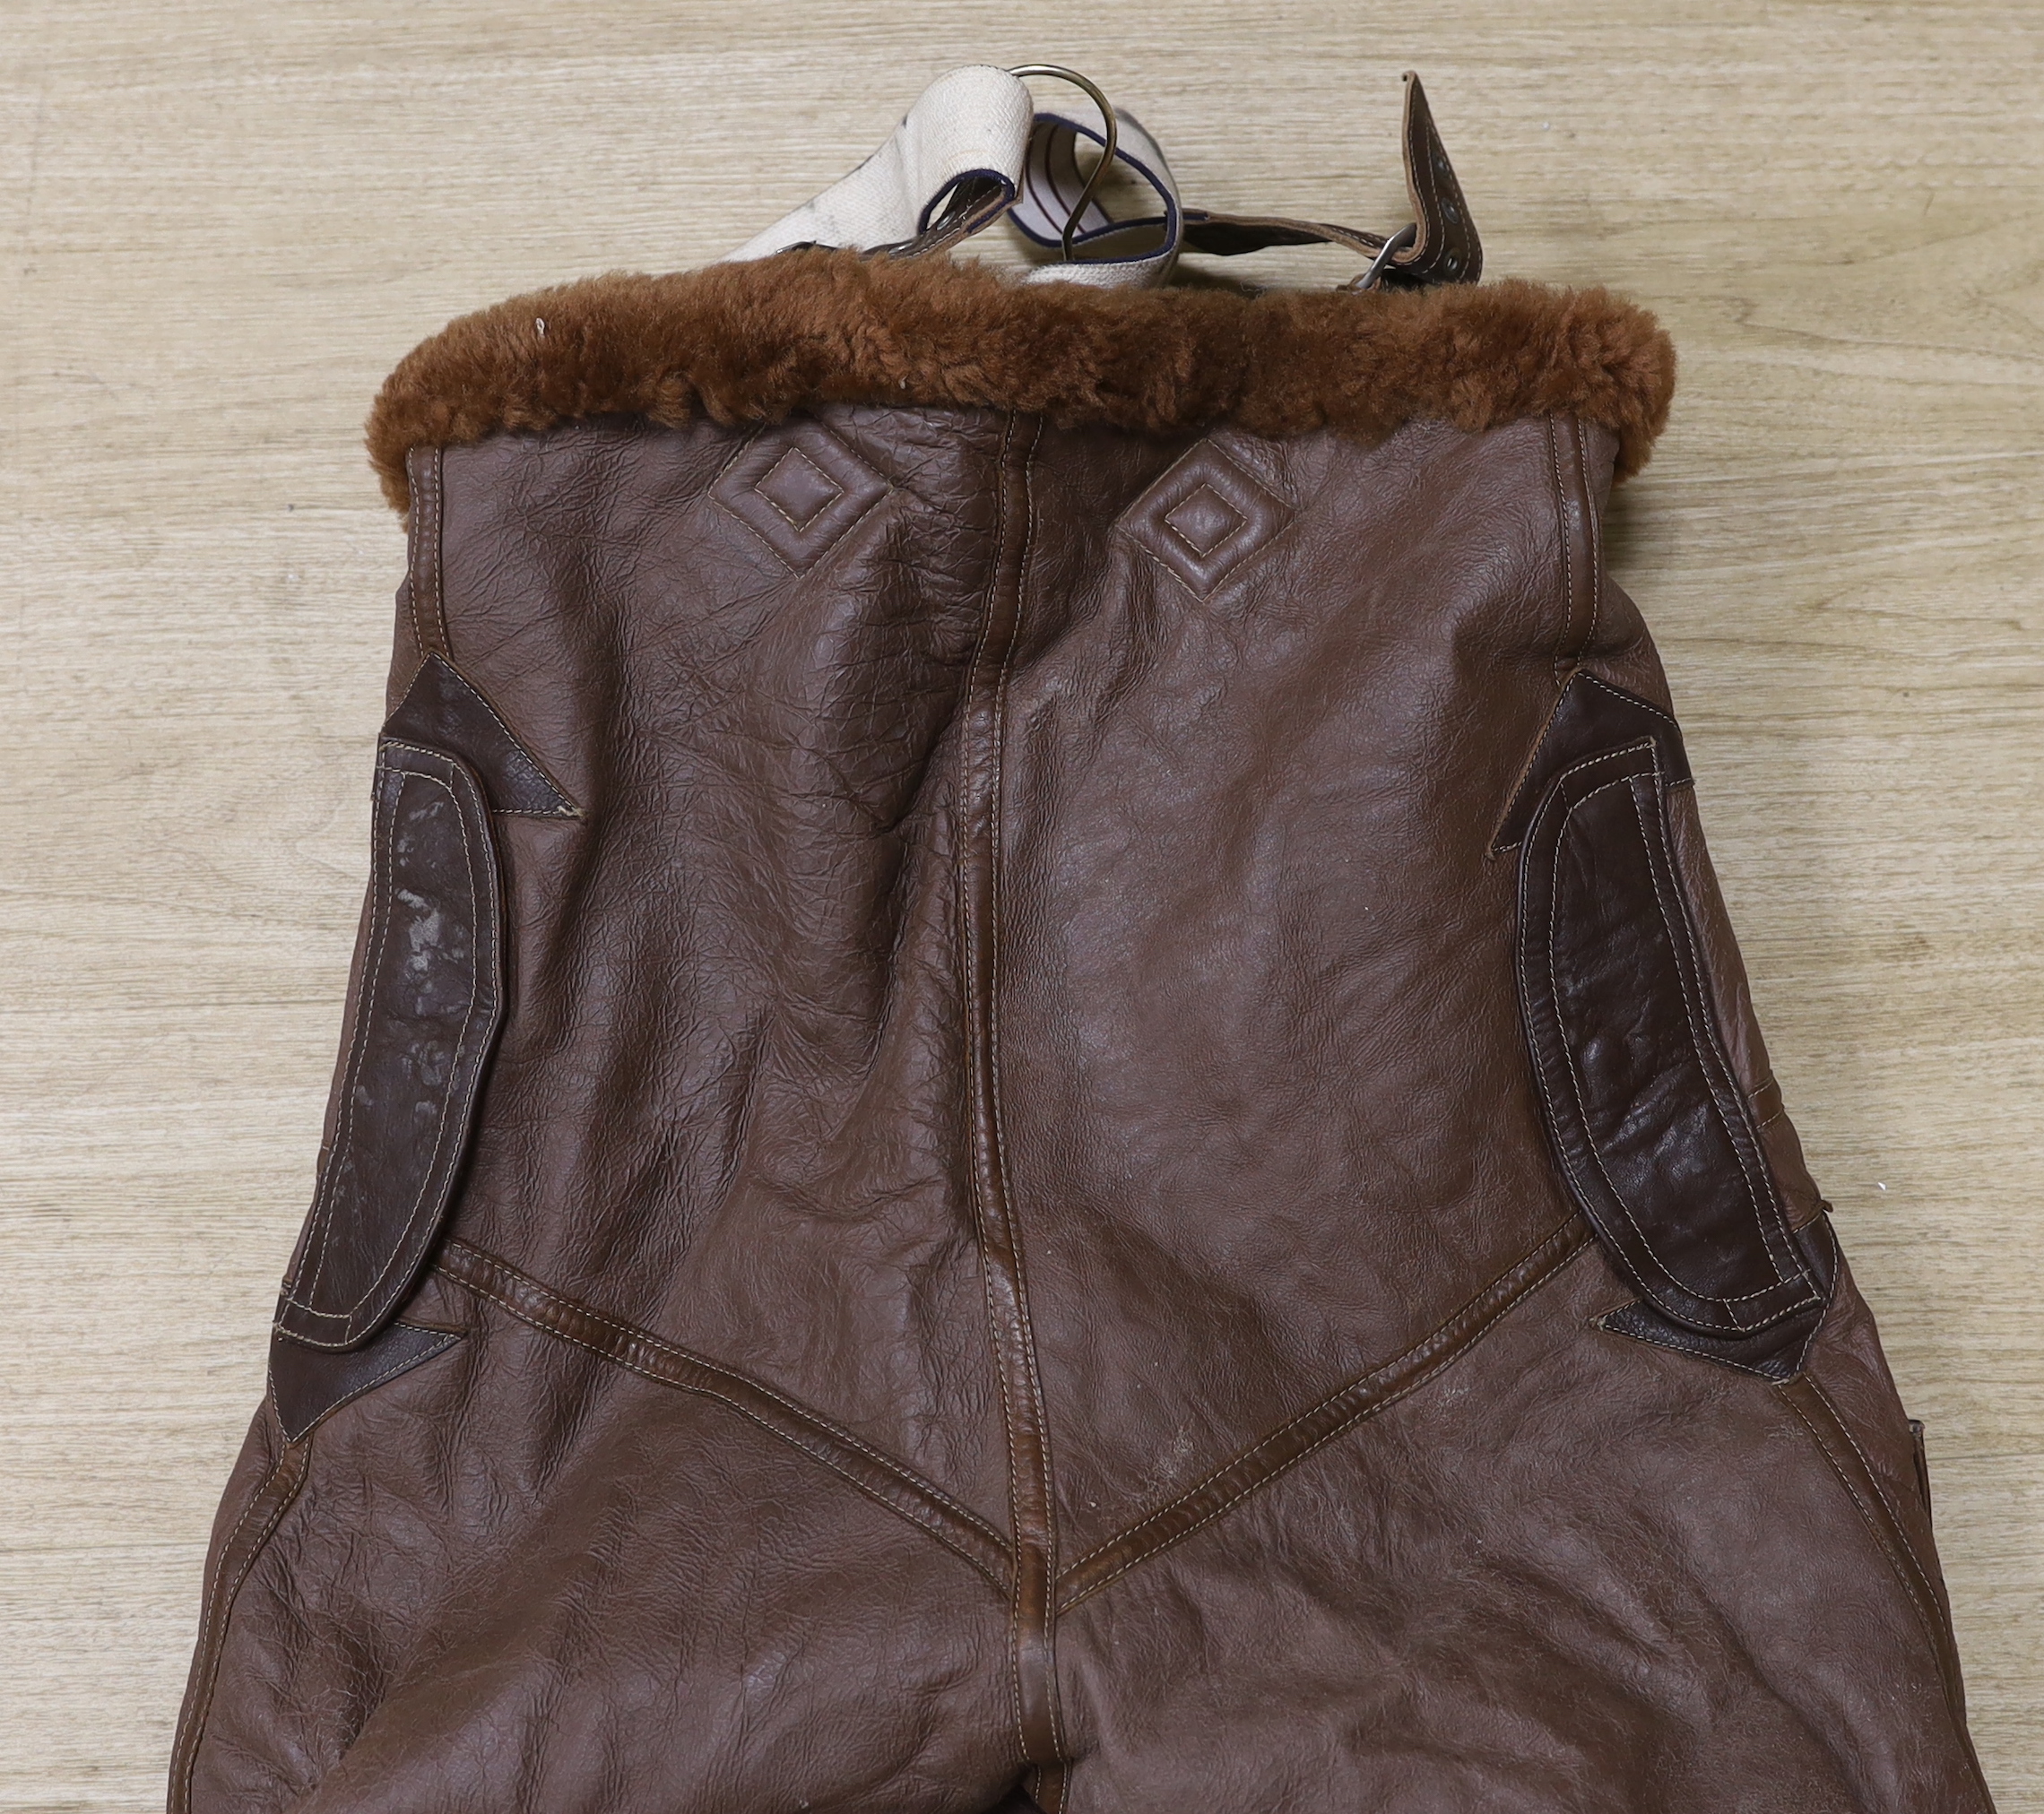 A pair of WWII Air Ministry issue RAF sheepskin breeches, with original label stating; ‘AM, Size: 5, Waist: 34-36, Seat: 40-42, Leg:32.5, 539778’, added in pen; ‘Brown’, provenance - by family descent